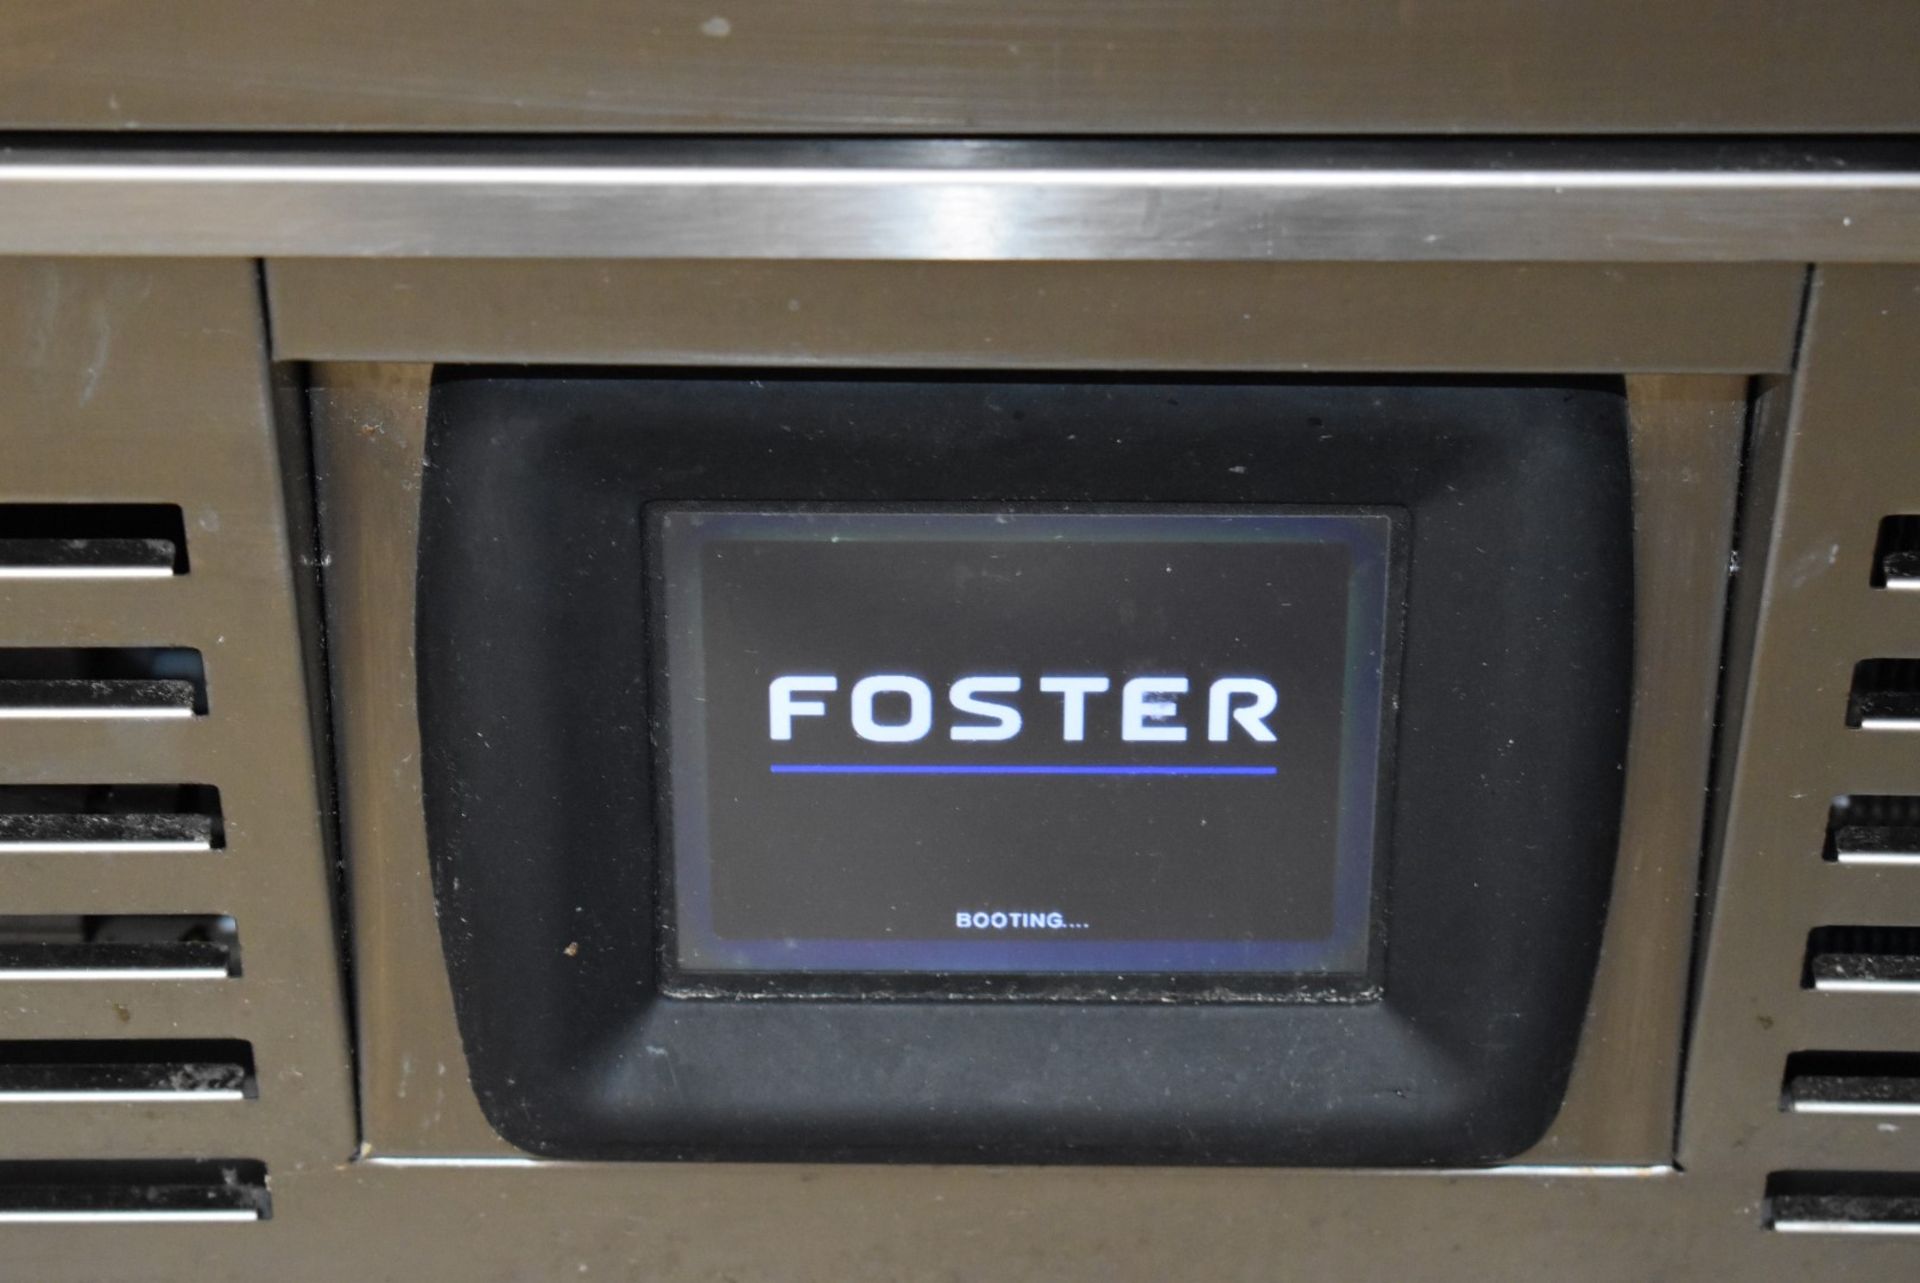 1 x Foster BFT15-7 Blast Freezer and Chiller - Current 2021 Model - RRP £6,562 - Image 2 of 8